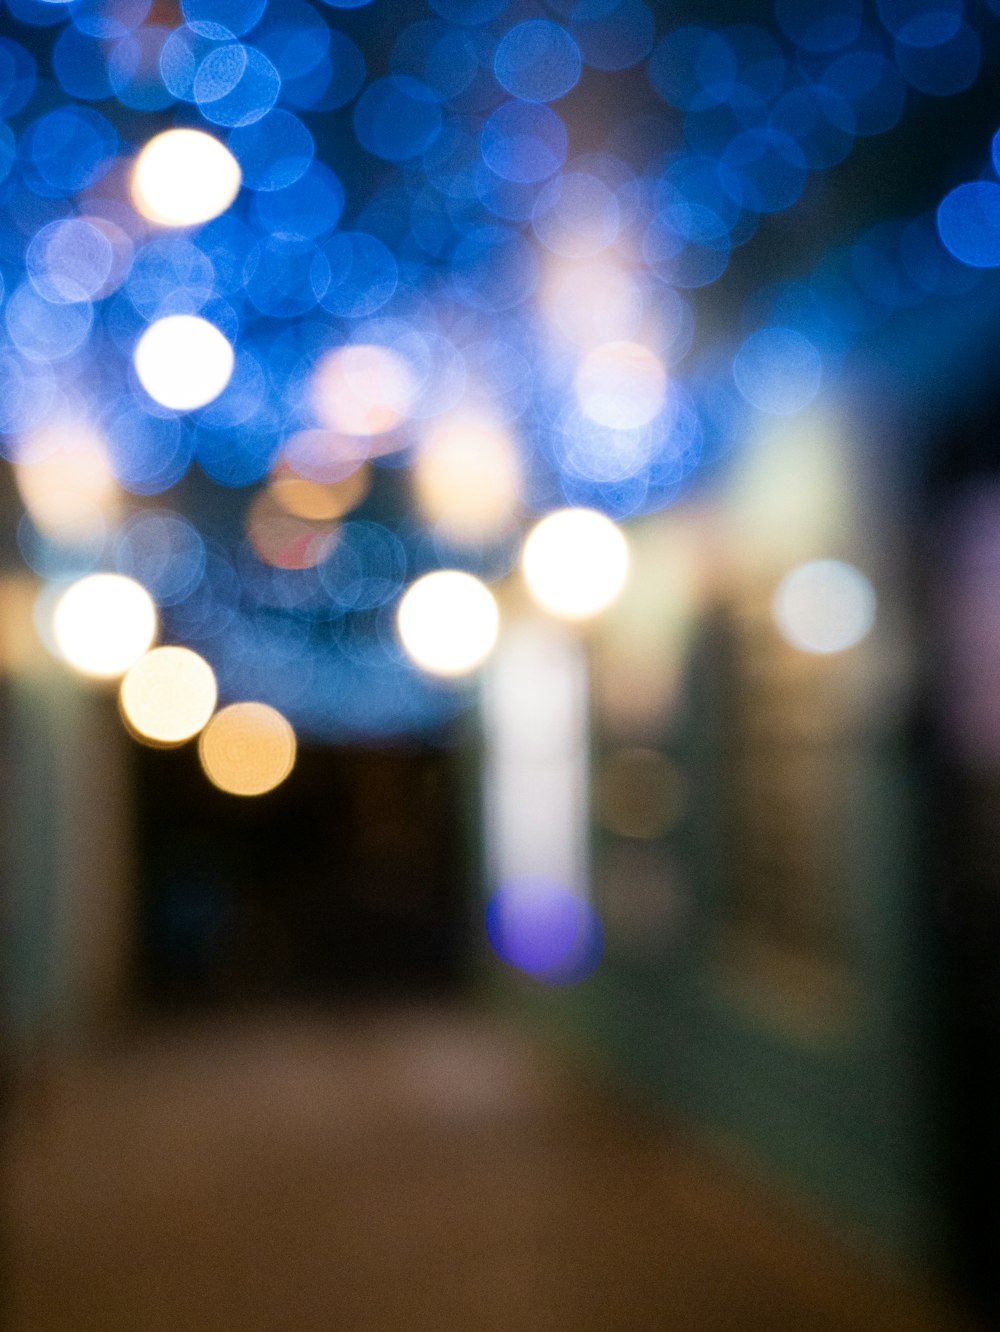 a blurry photo of a hallway with lights